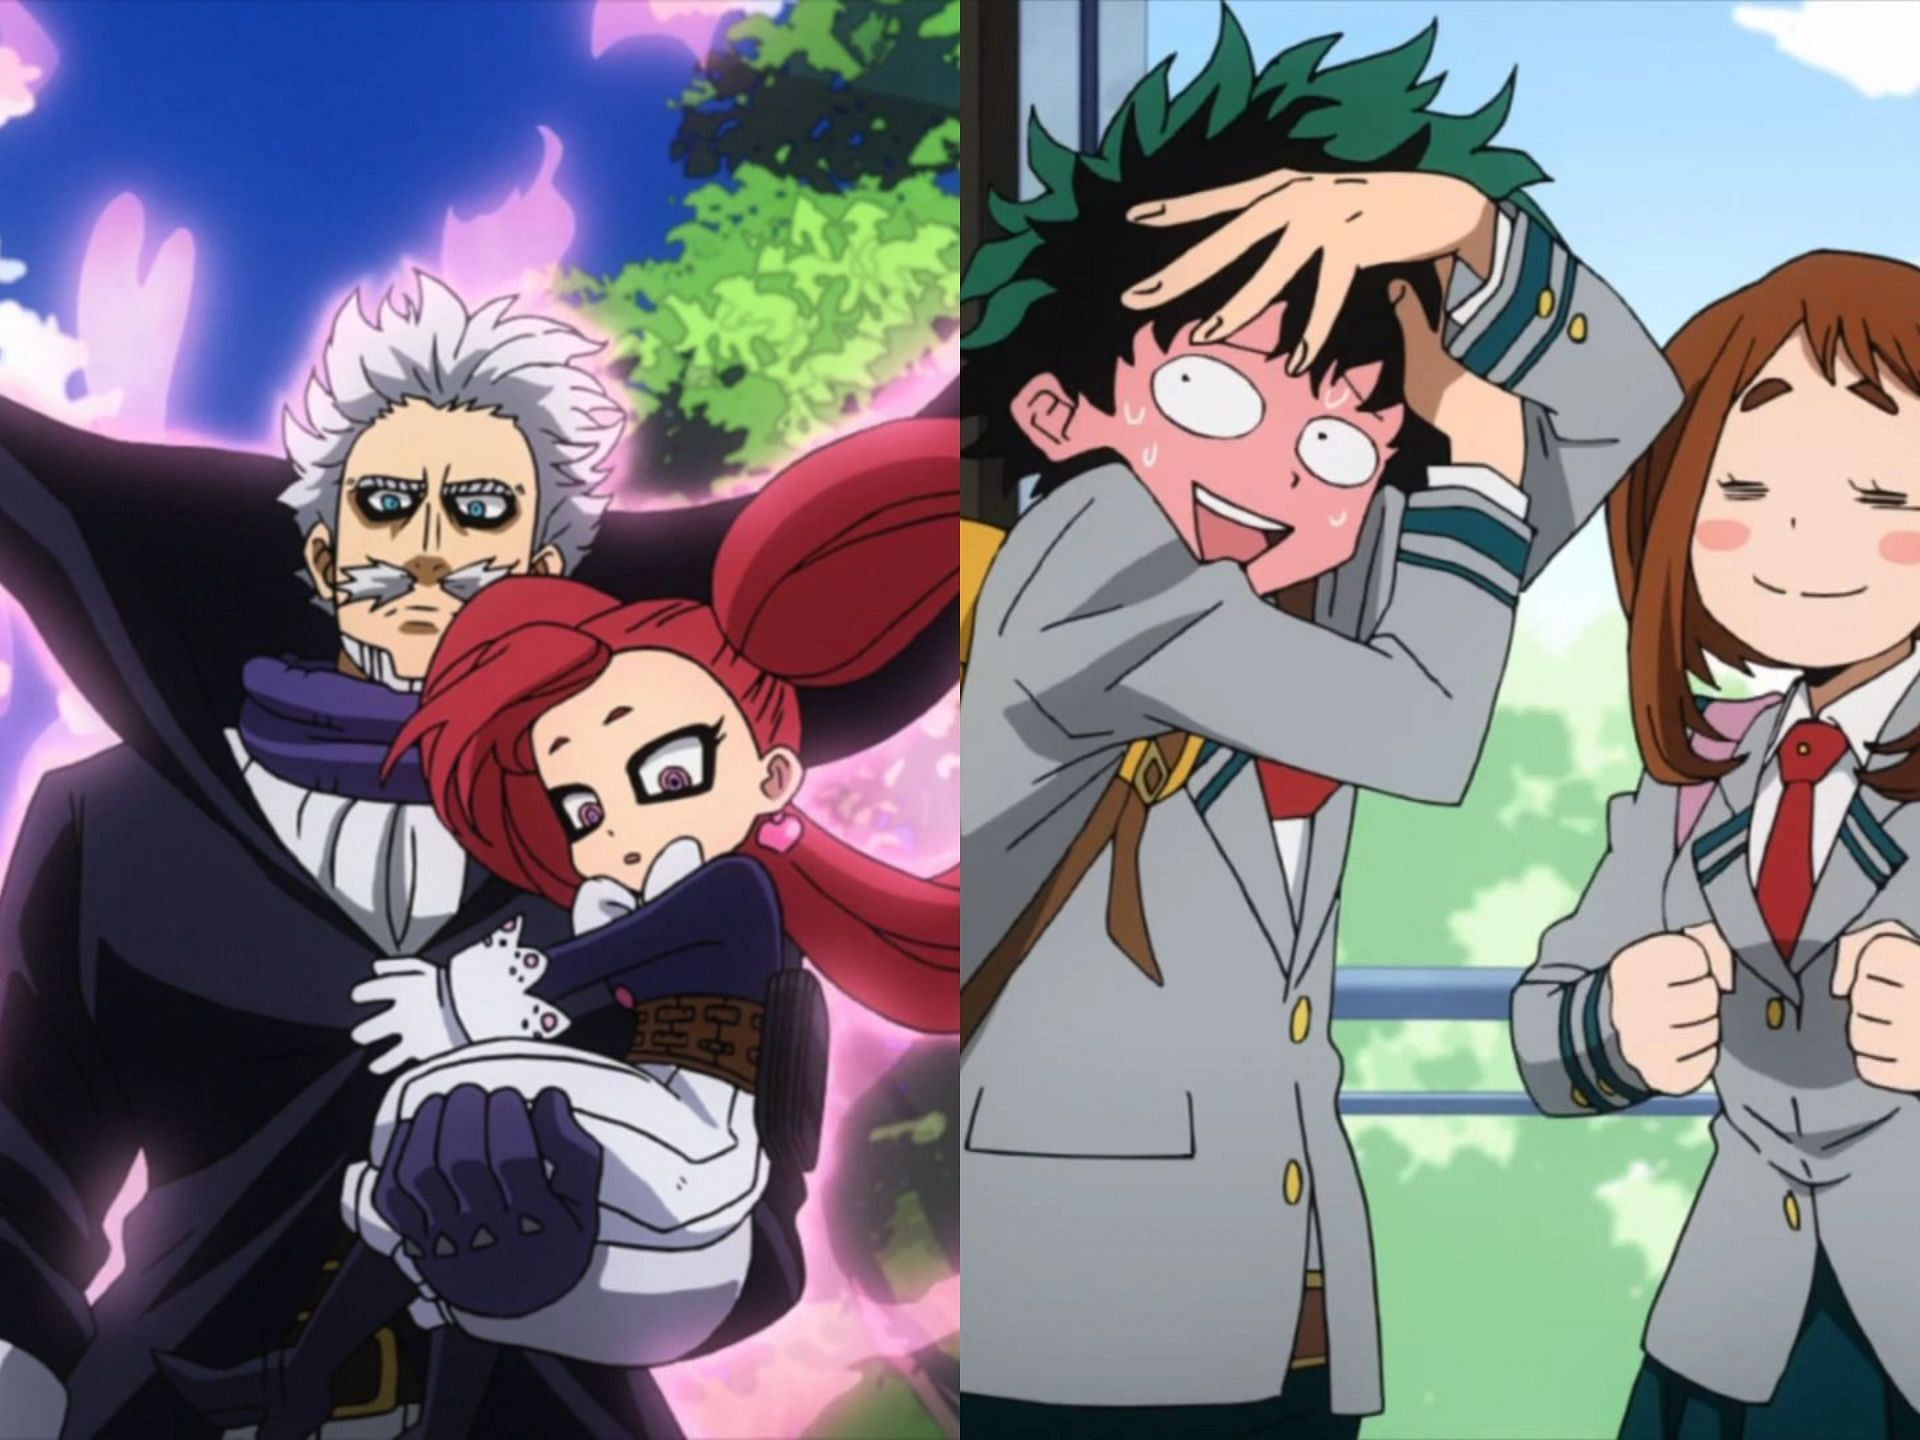 The Most Controversial Anime Ships That Drive Fans Crazy